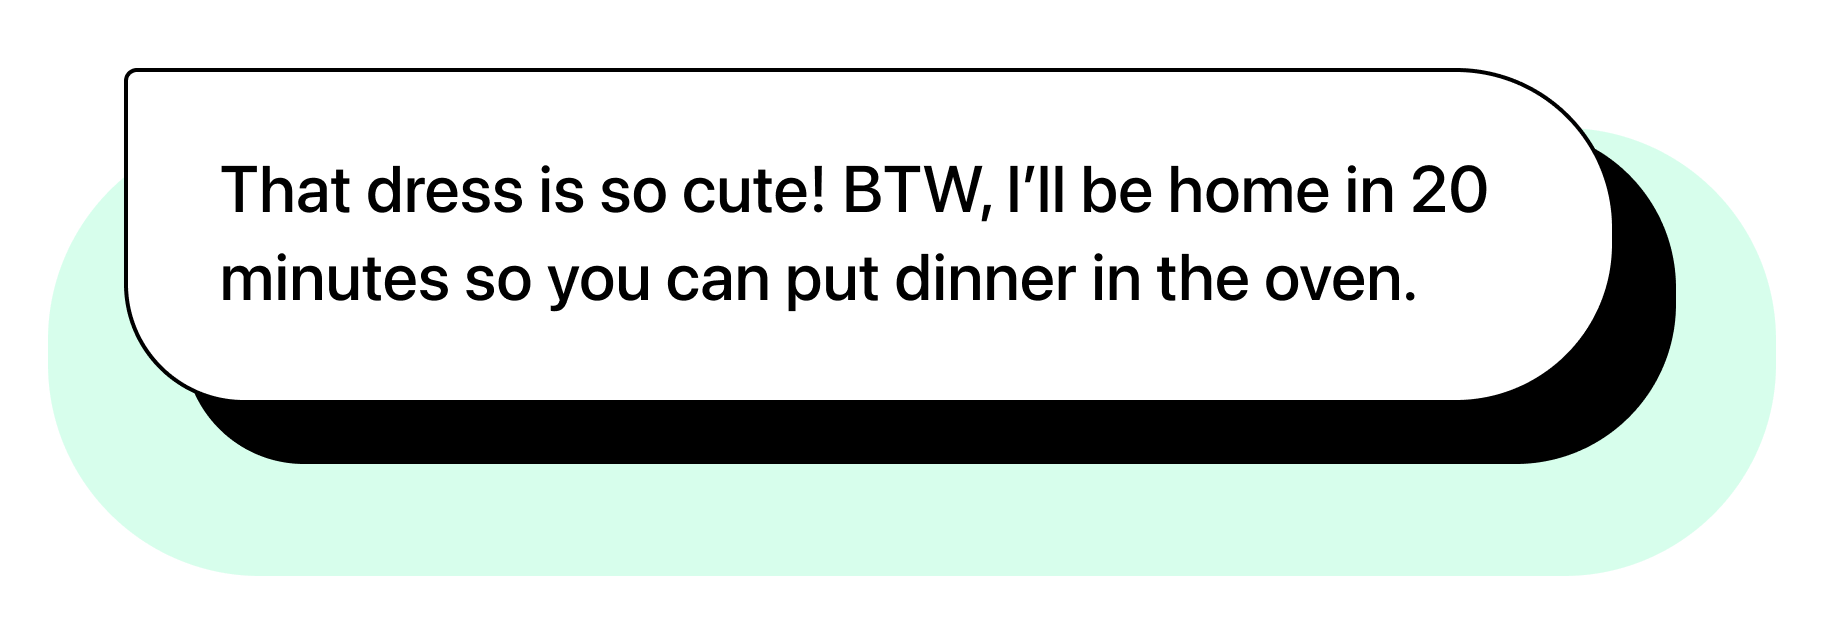 Chat bubble illustration with text: "That dress is so cute! BTW, I’ll be home in 20 minutes so you can put dinner in the oven."